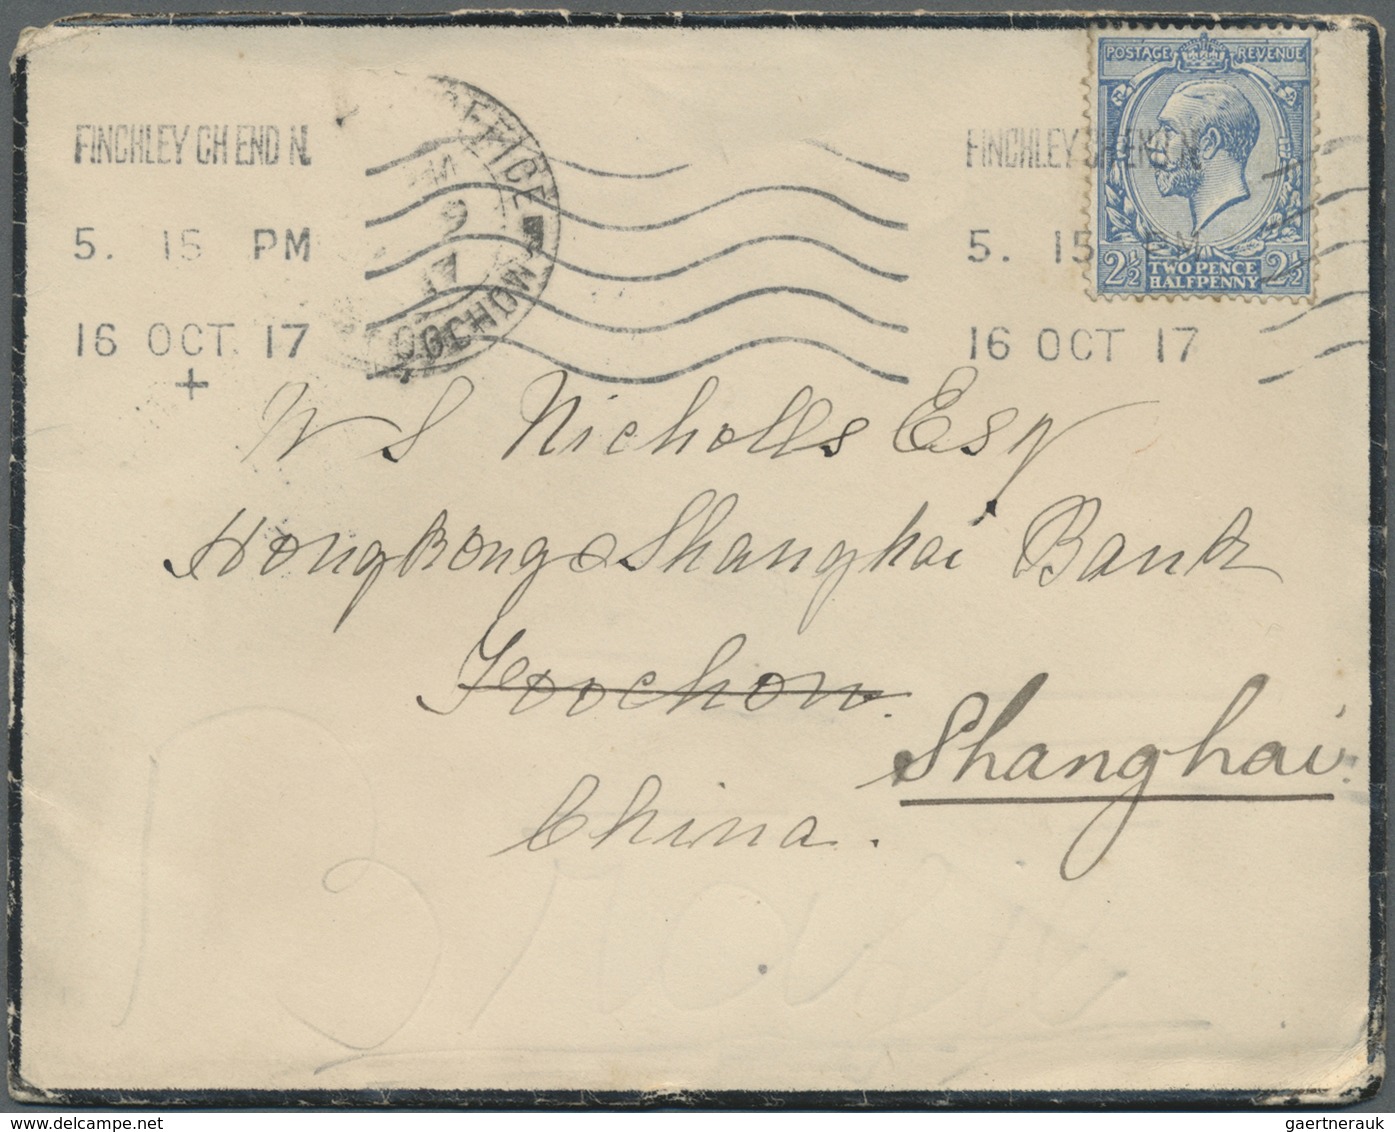 Br China - Incoming Mail: 1916/18, Great Britain, the Nicholls correspondence of small size covers (11)